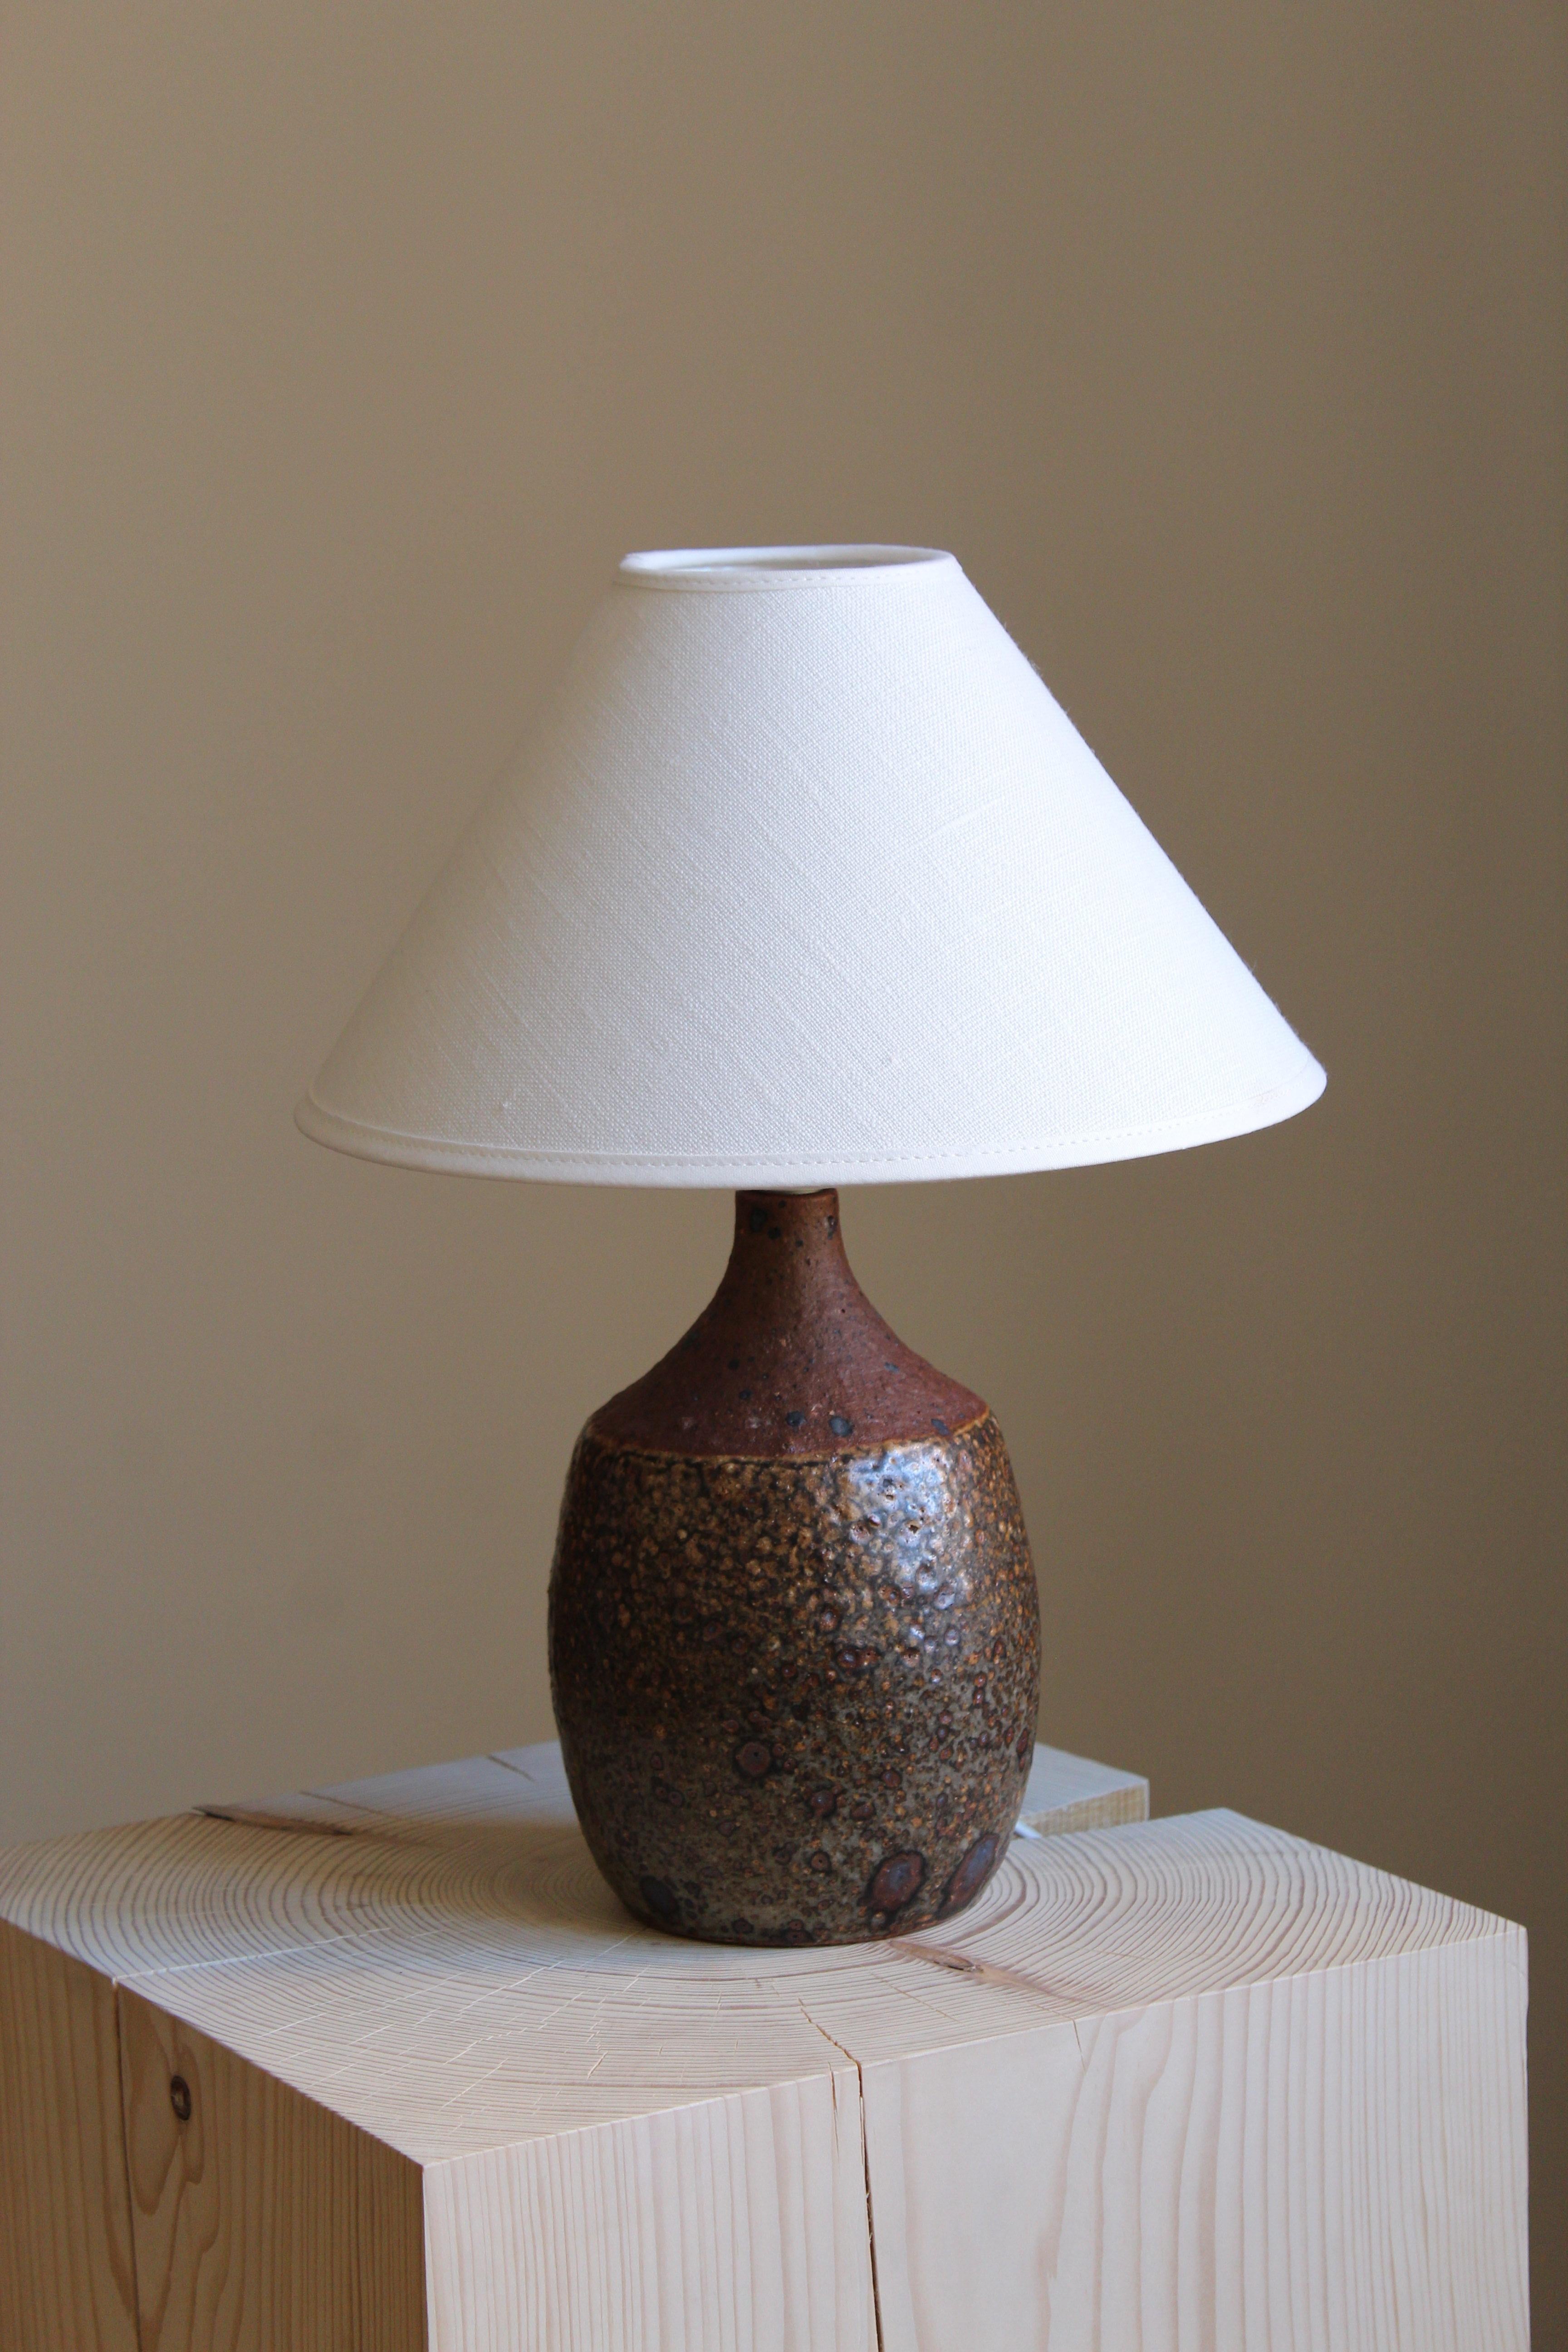 A table lamp. Produced and designed by Rolf Palm, Sweden.

In glazed stoneware. Sold without lampshade.